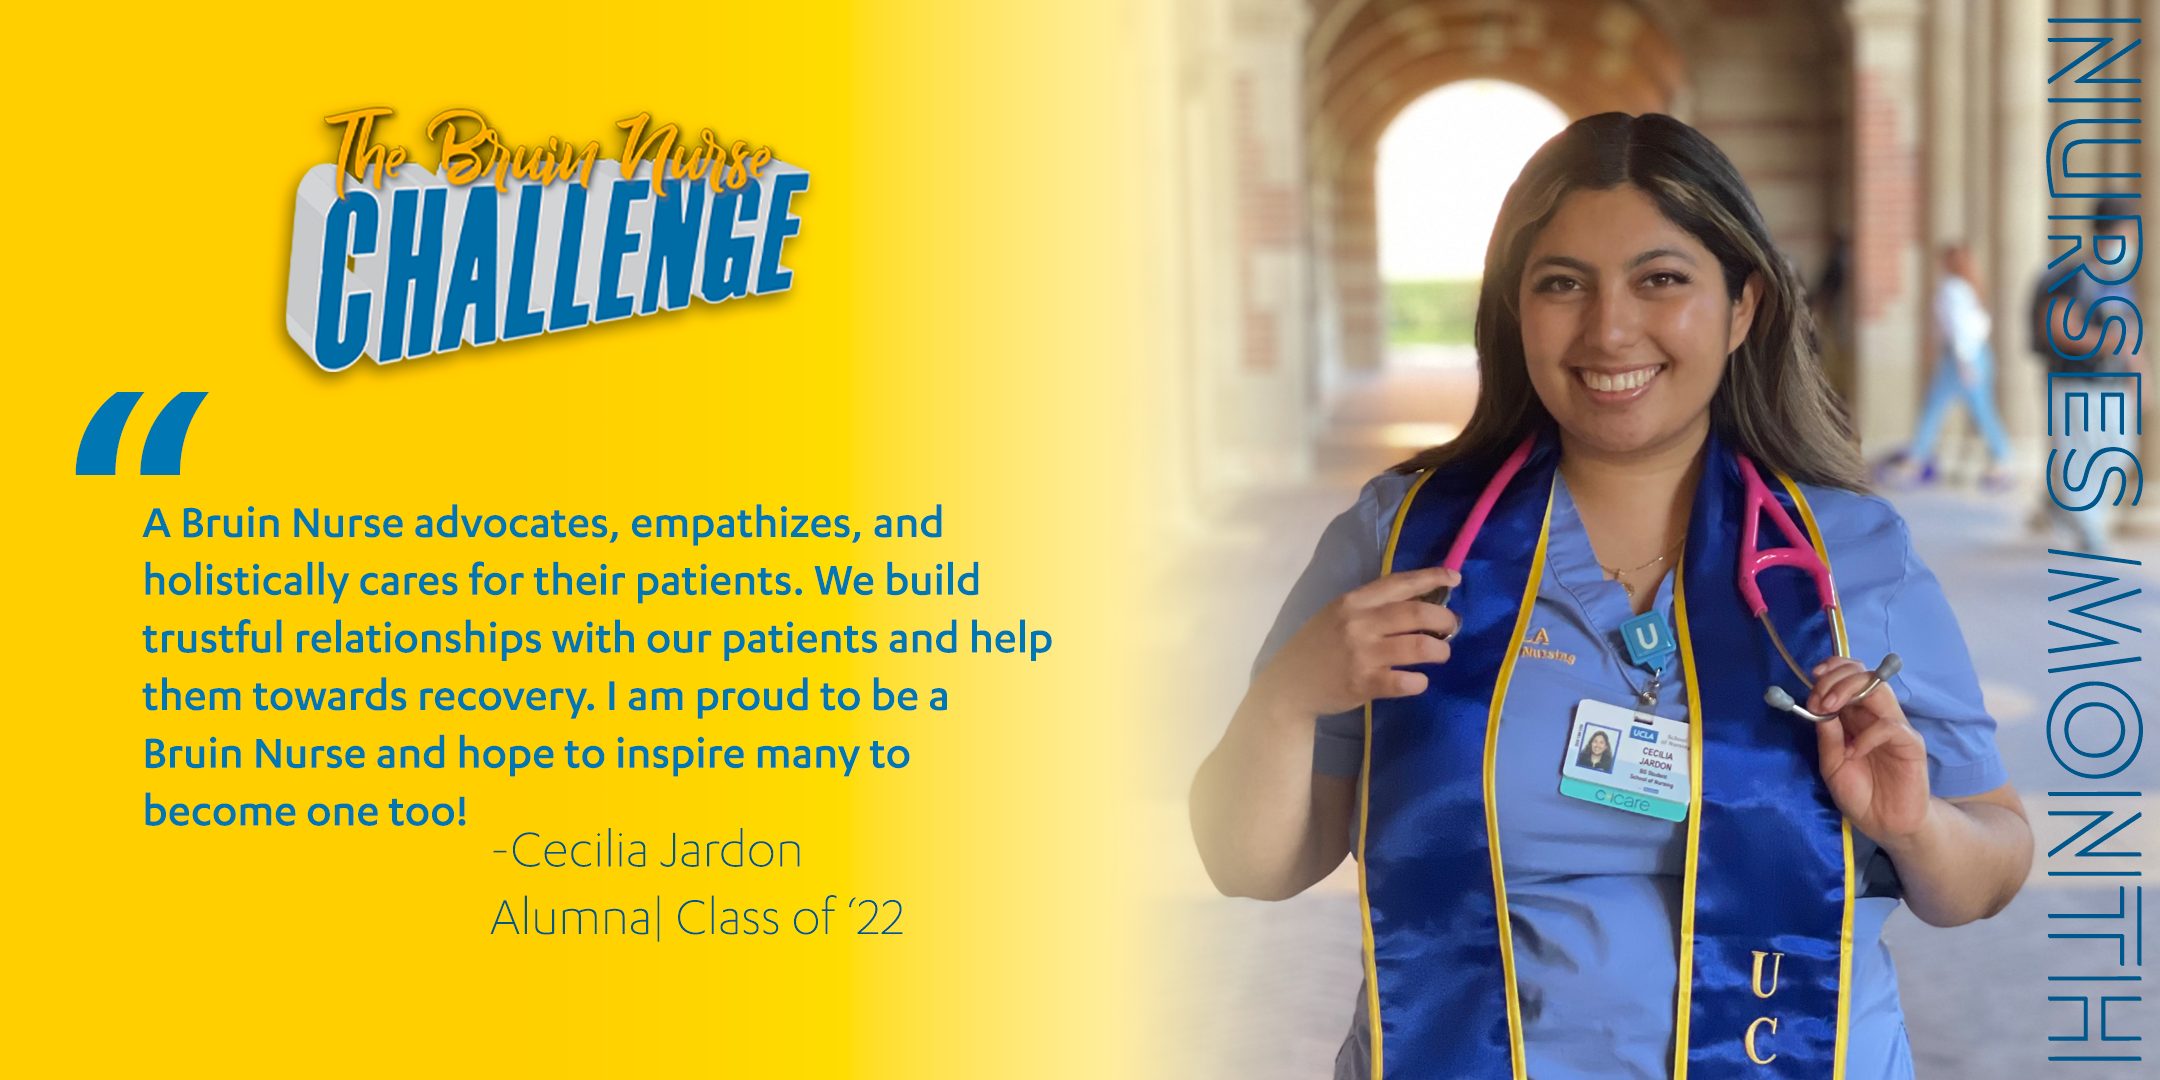 Bruin Nurse Challenge graphic featuring Cecilia Jardon's quote, "A Bruin Nurse advocates, empathizes, and holistically cares for their patients. We build trustful relationships with our patients and help them towards recovery. I am proud to be a Bruin Nurse and hope to inspire many to become one too!"